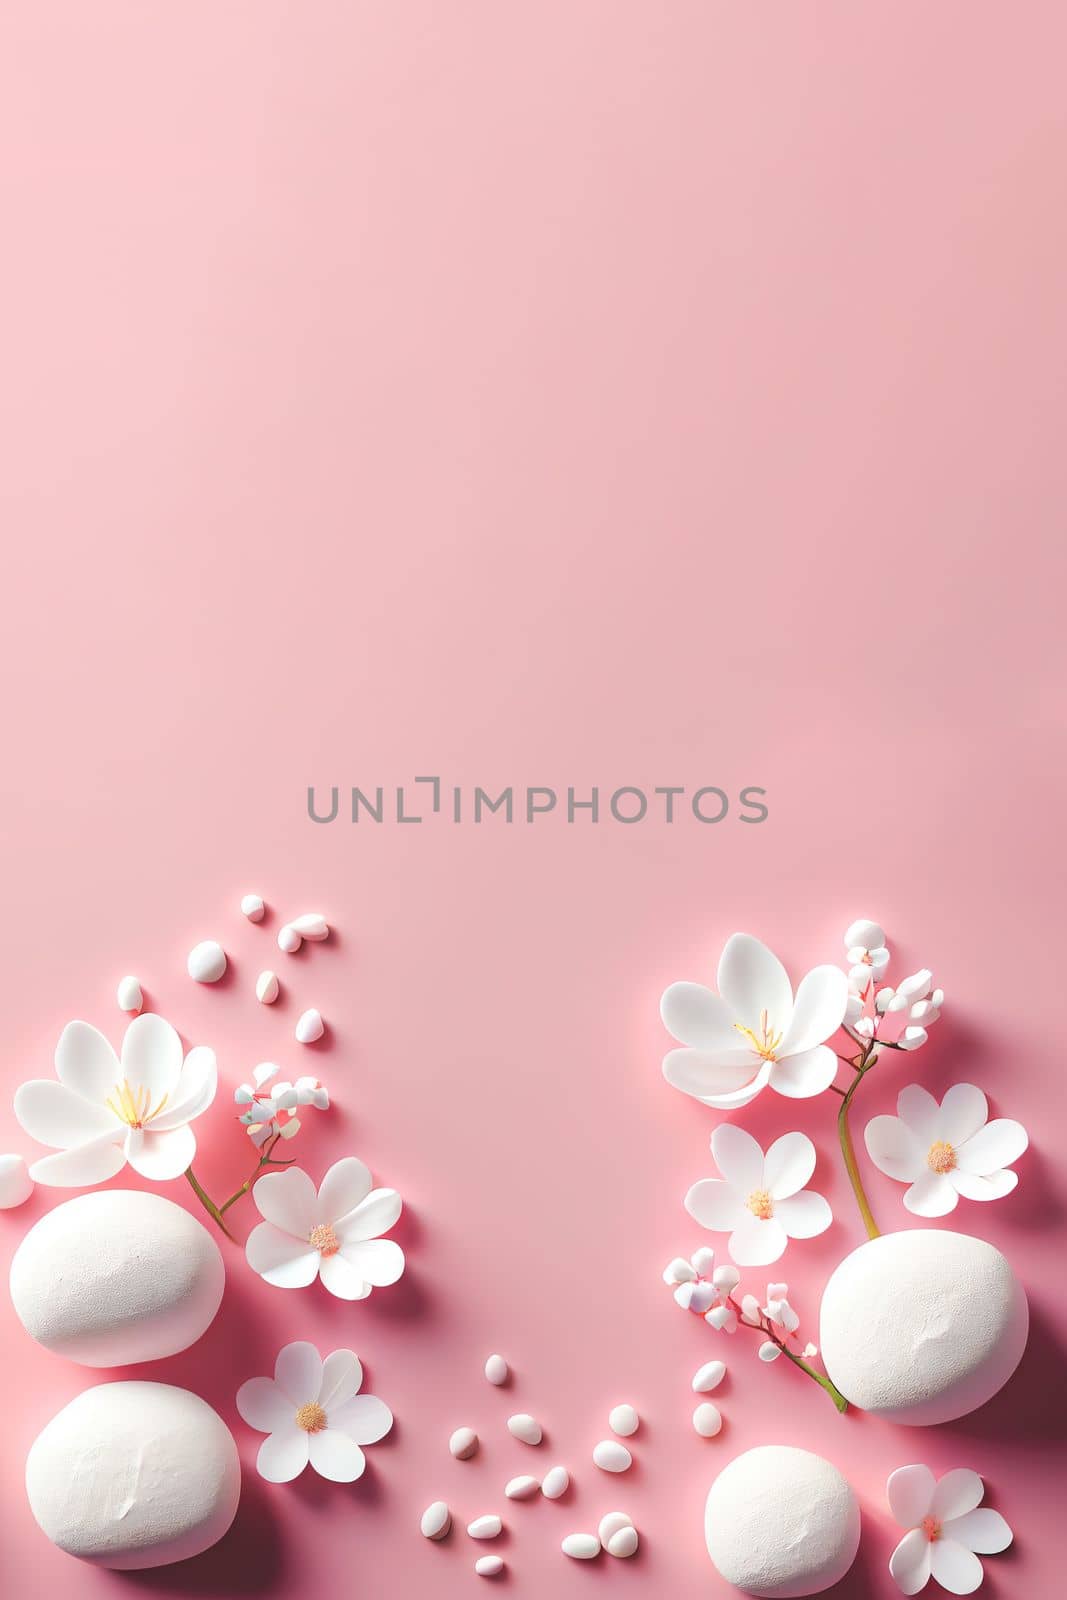 White stones with blossom flowers on pink background. Panoramic banner background with copy space. by FokasuArt